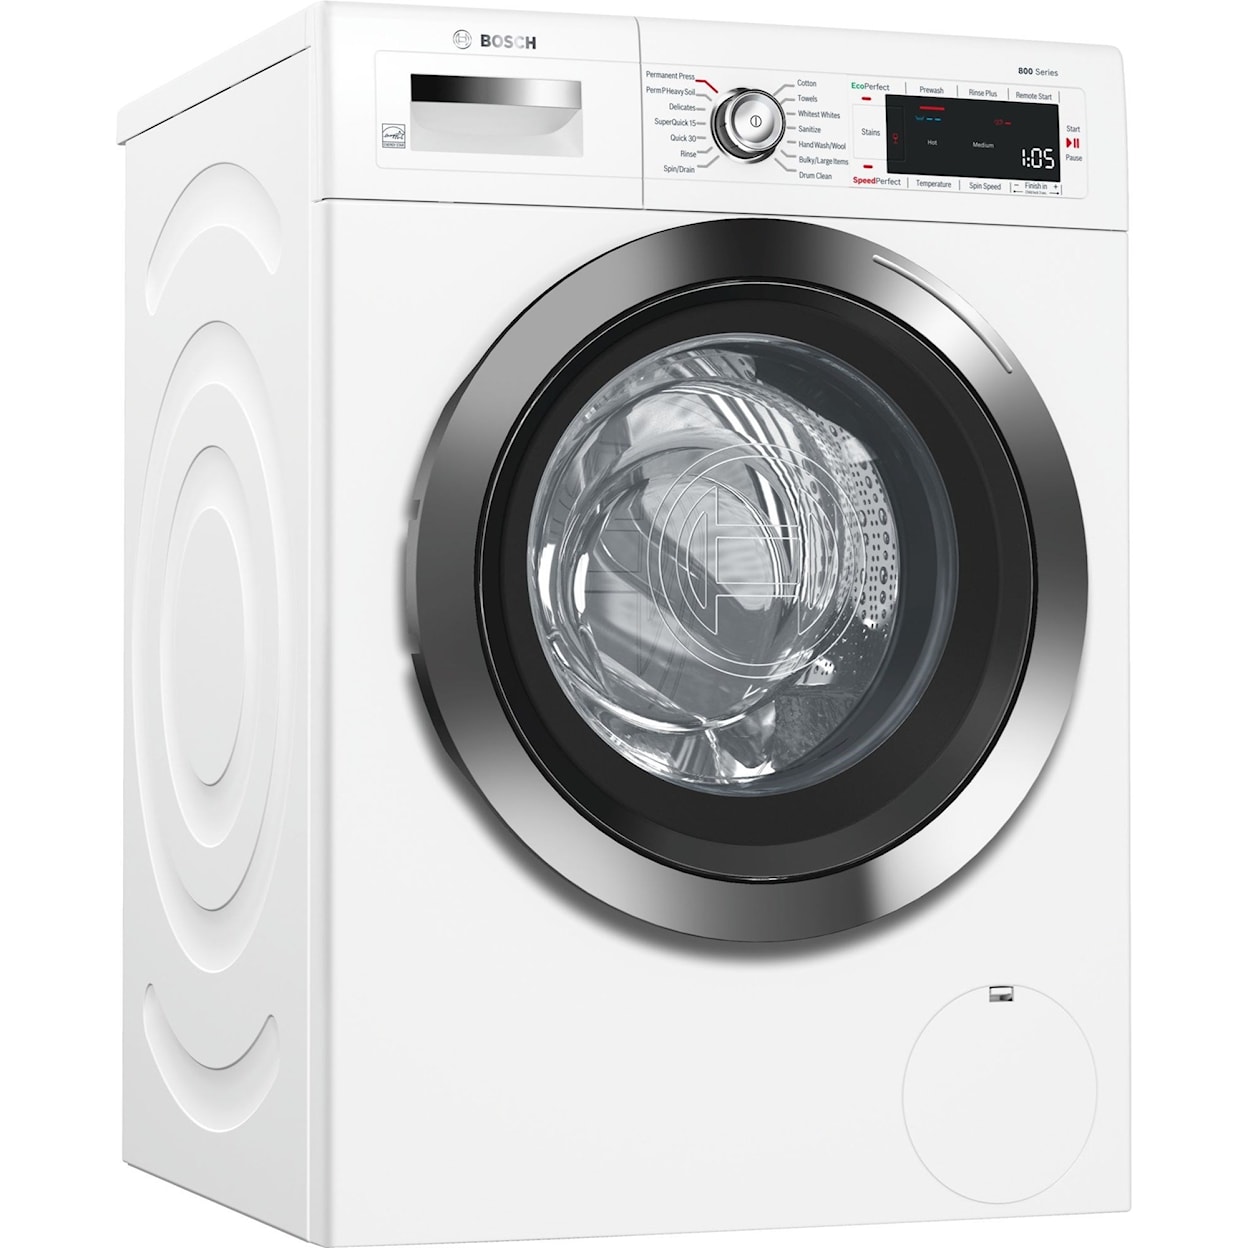 Bosch Vision Laundry Appliances 24" Compact Washer and Dryer Combo